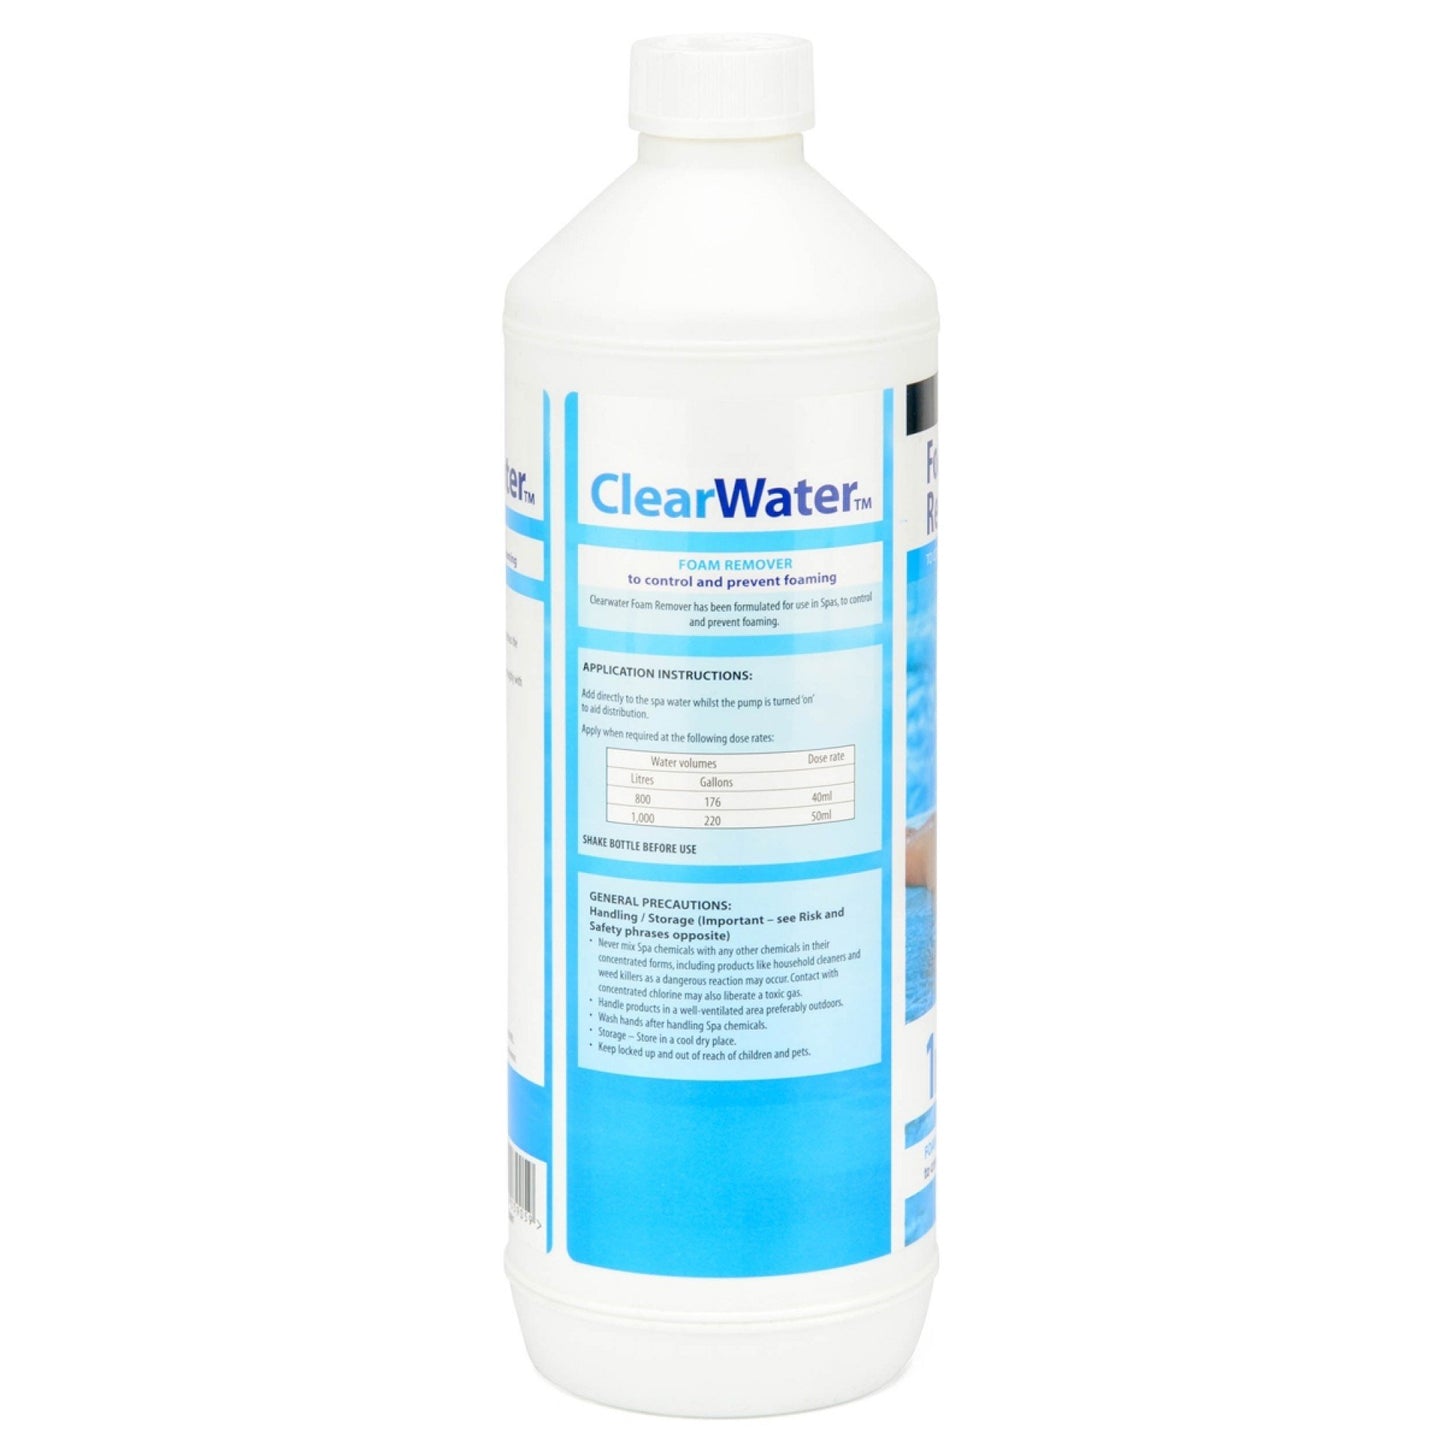 Clearwater Foam Remover (1L)